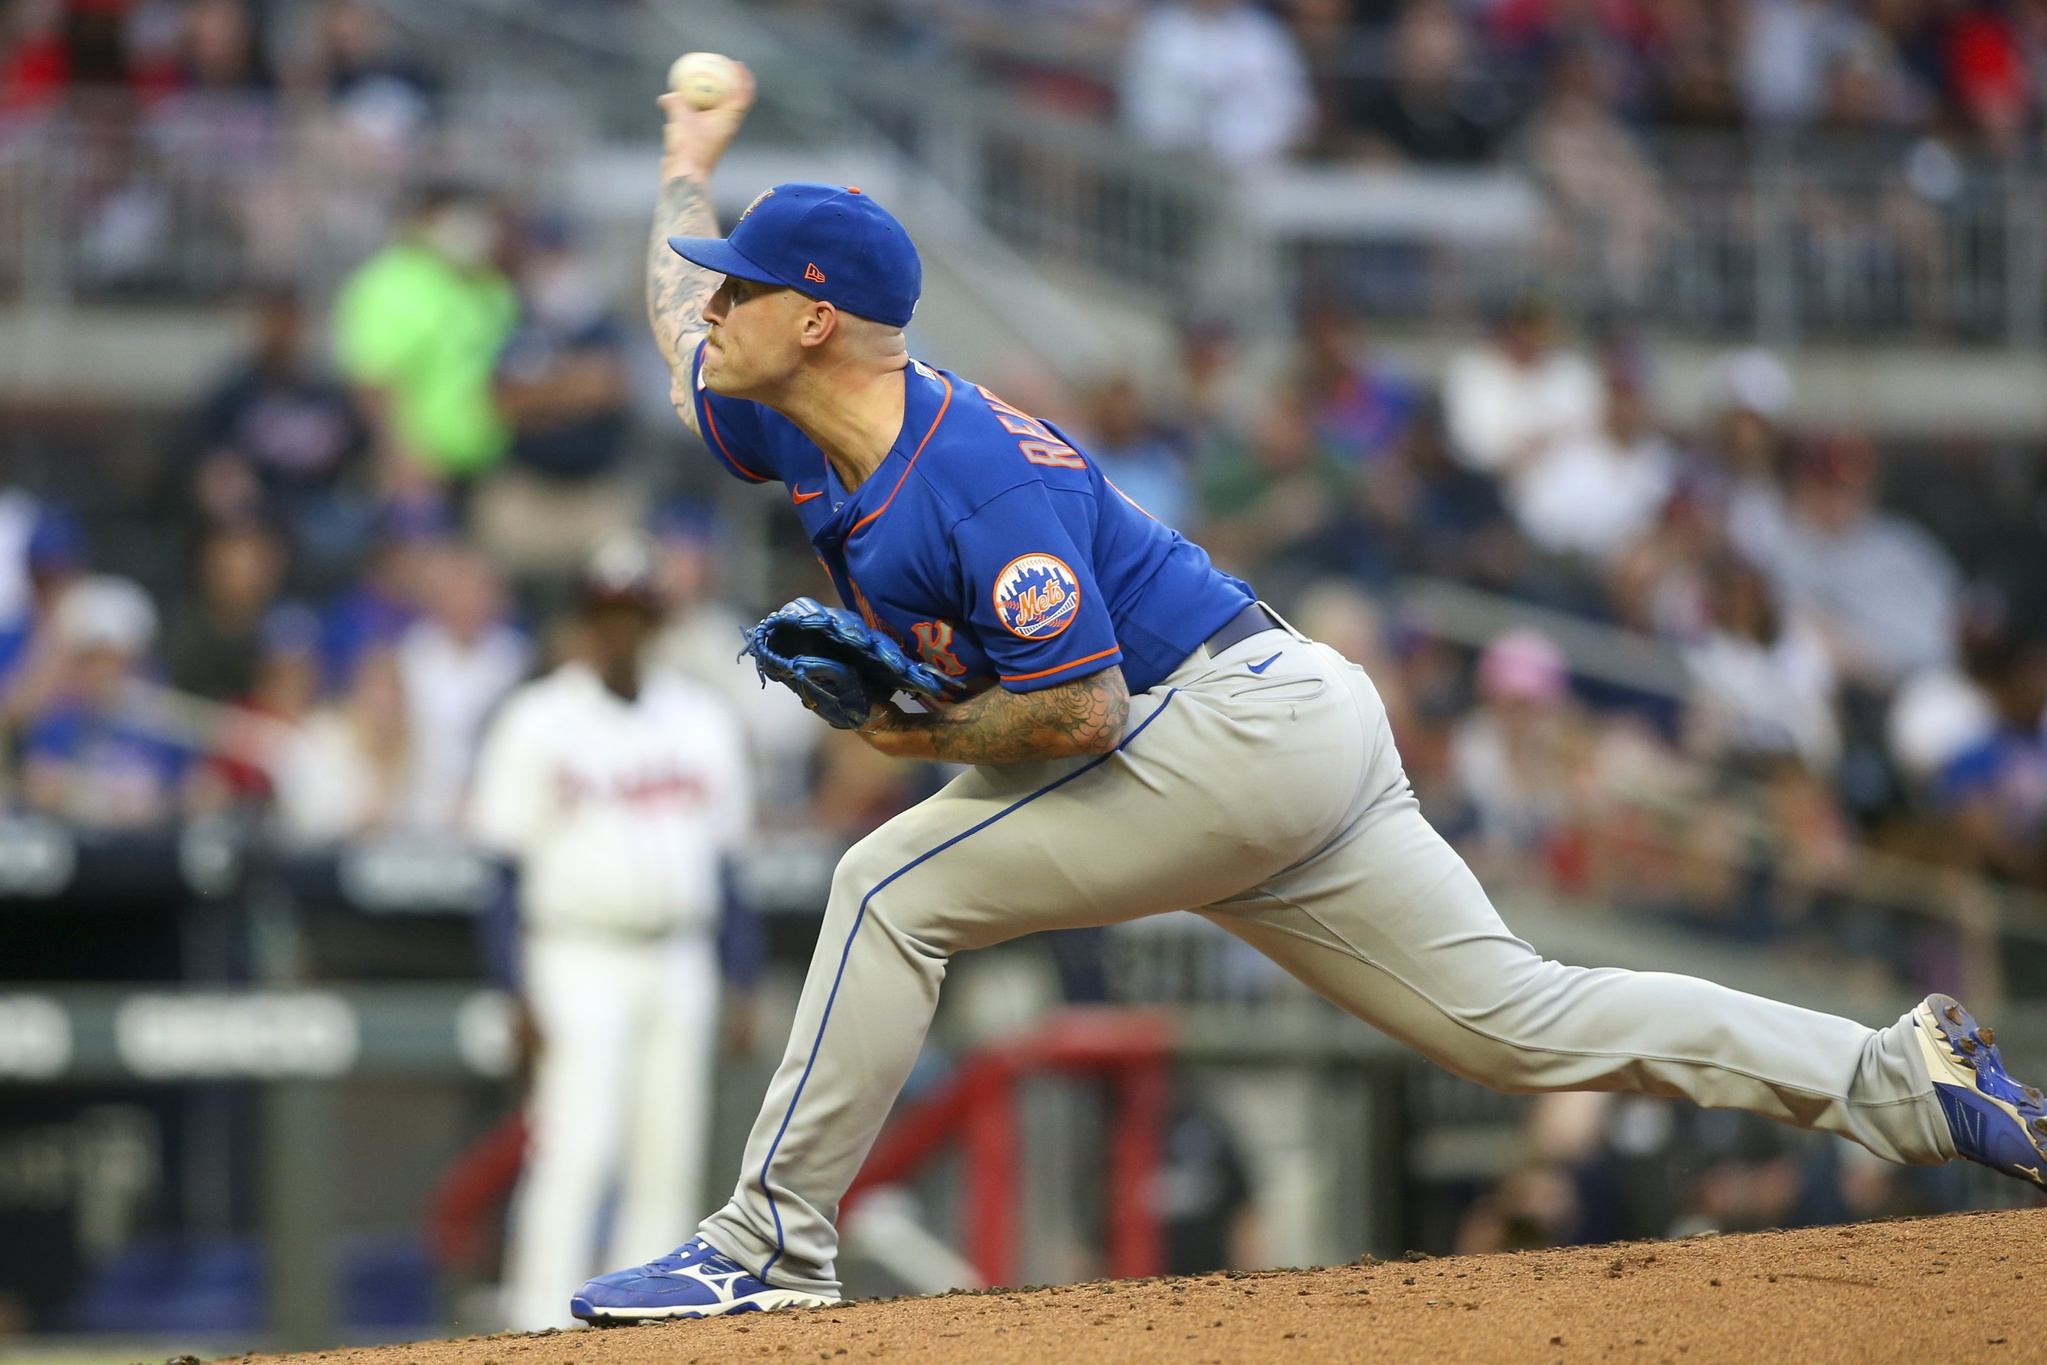 Mets Make Roster Moves Ahead of Series Opener with Reds